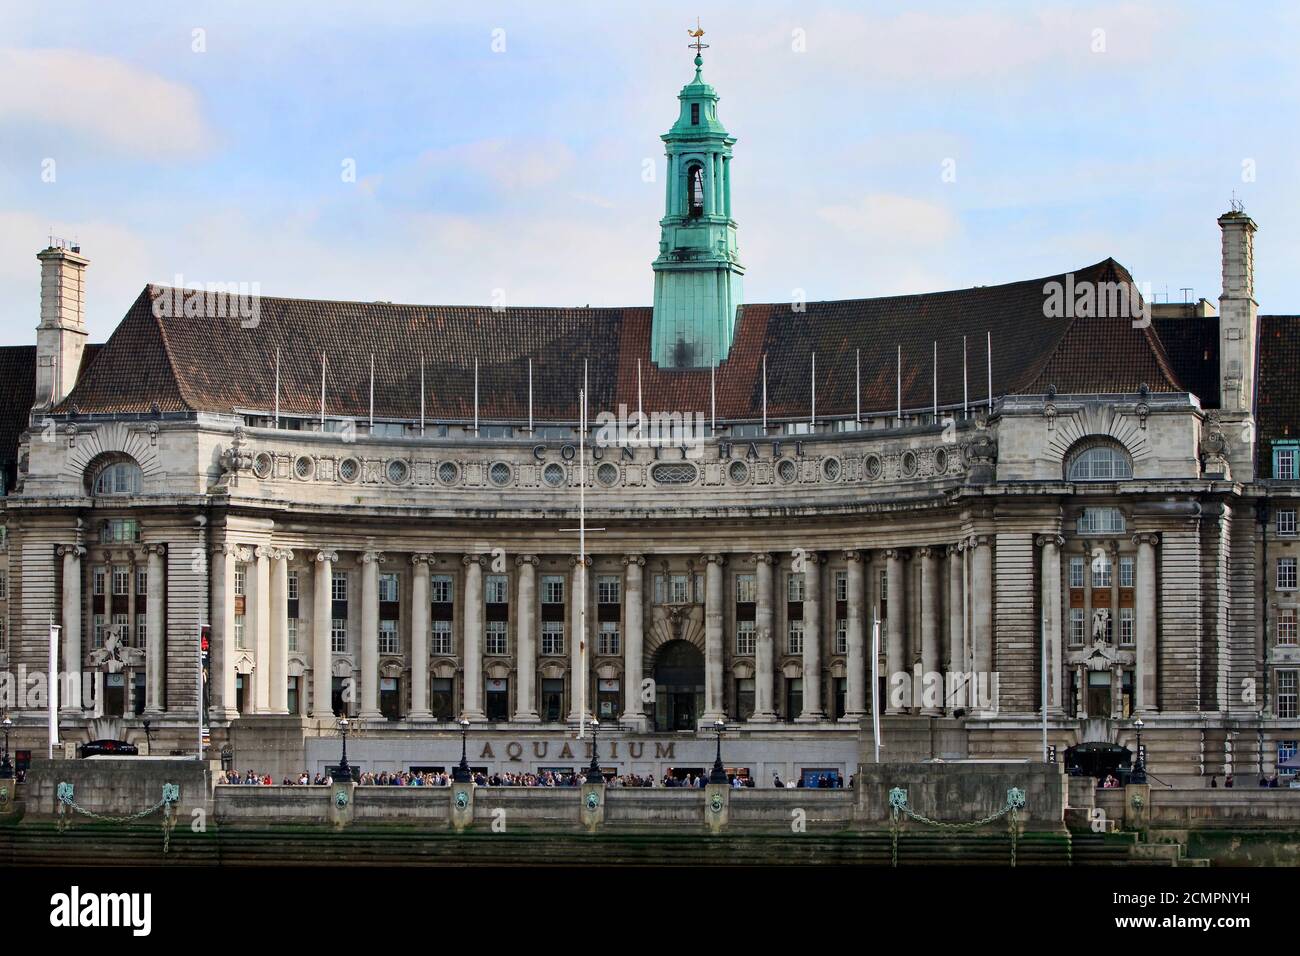 2018, London, UK.  County Hall on the South Bank of the River Thames houses the London Aquarium along with other visitor attractions.  It is very popu Stock Photo